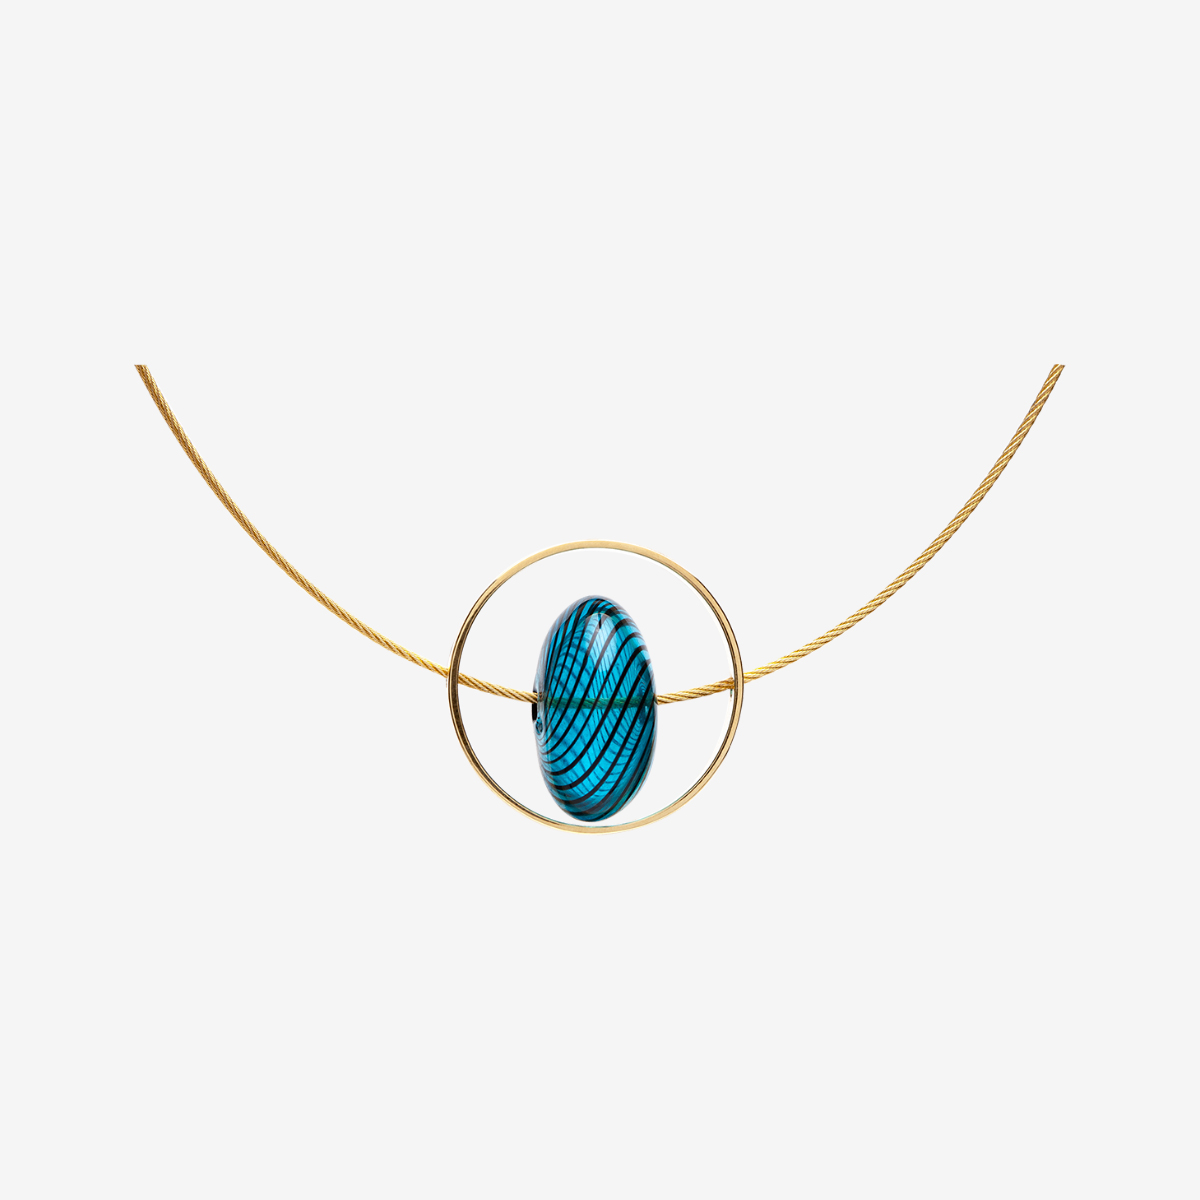 Xar handmade necklace in 18k silver vermeil, blue glass and gold-plated steel cable designed by Belen Bajo